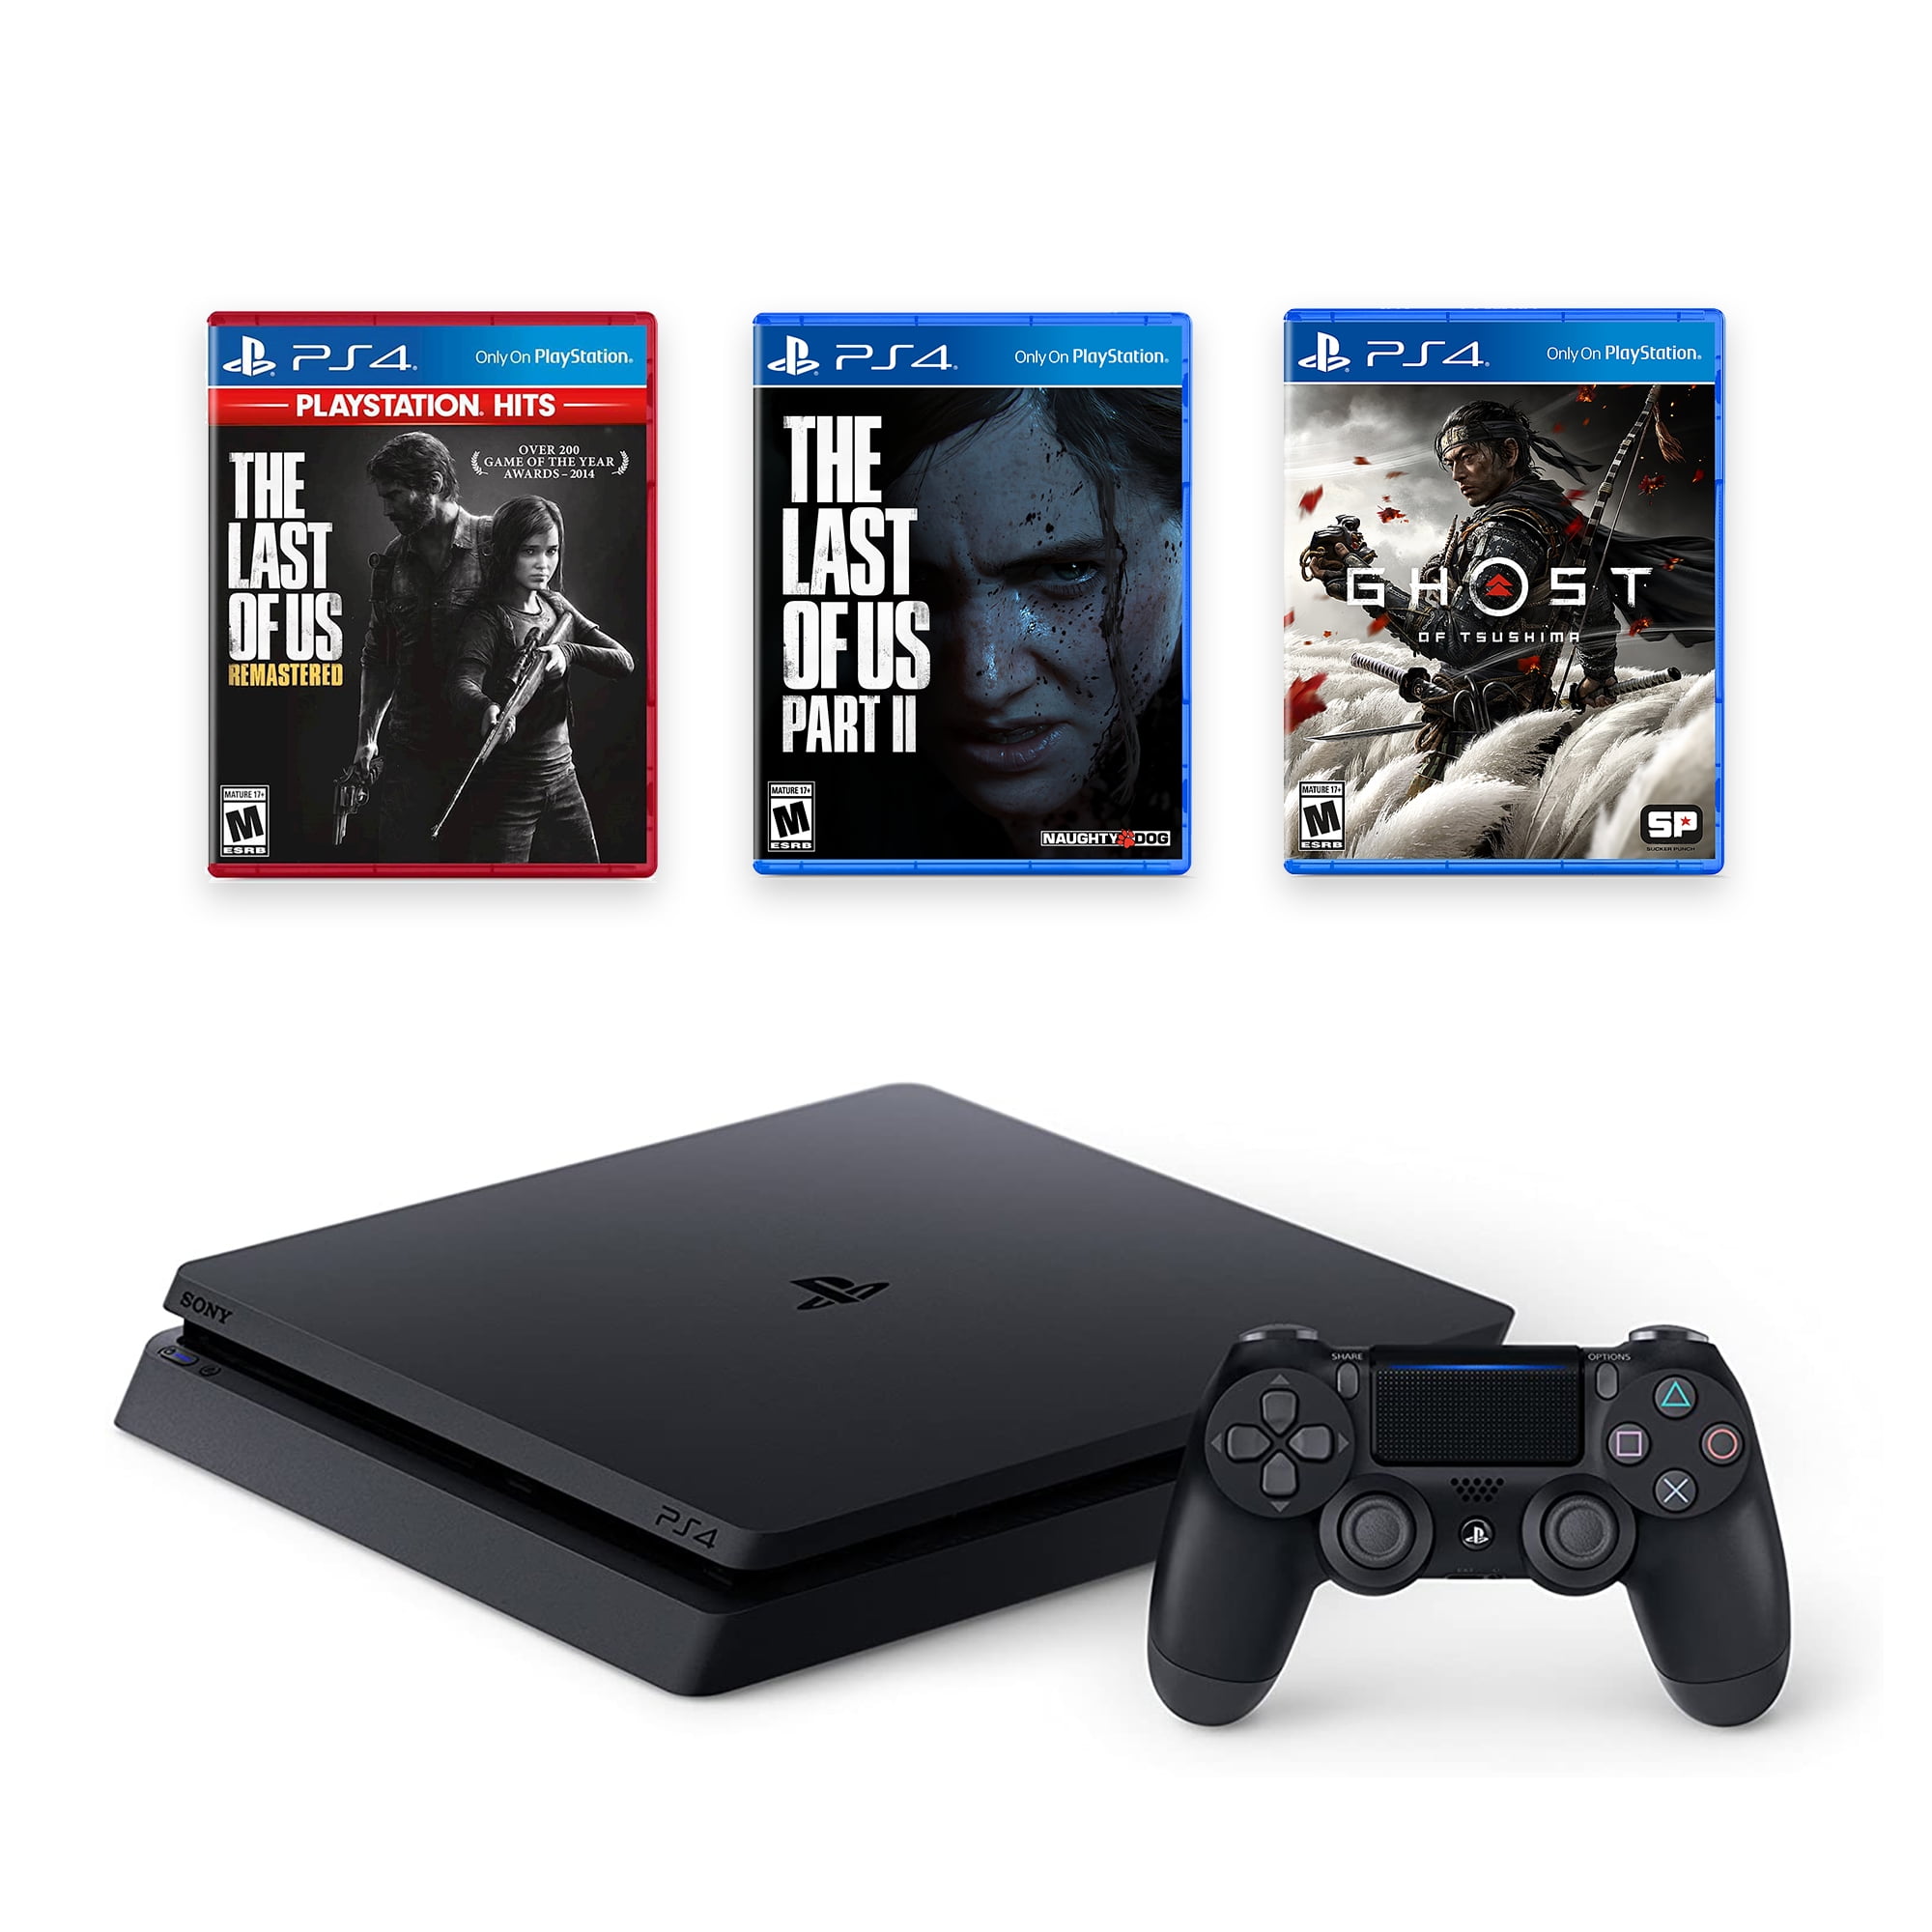 PlayStation 4 1TB with The Last of Us and Ghost Tsushima - PS4 Slim 1TB Jet Black Gaming Wireless Controller and Games - Walmart.com